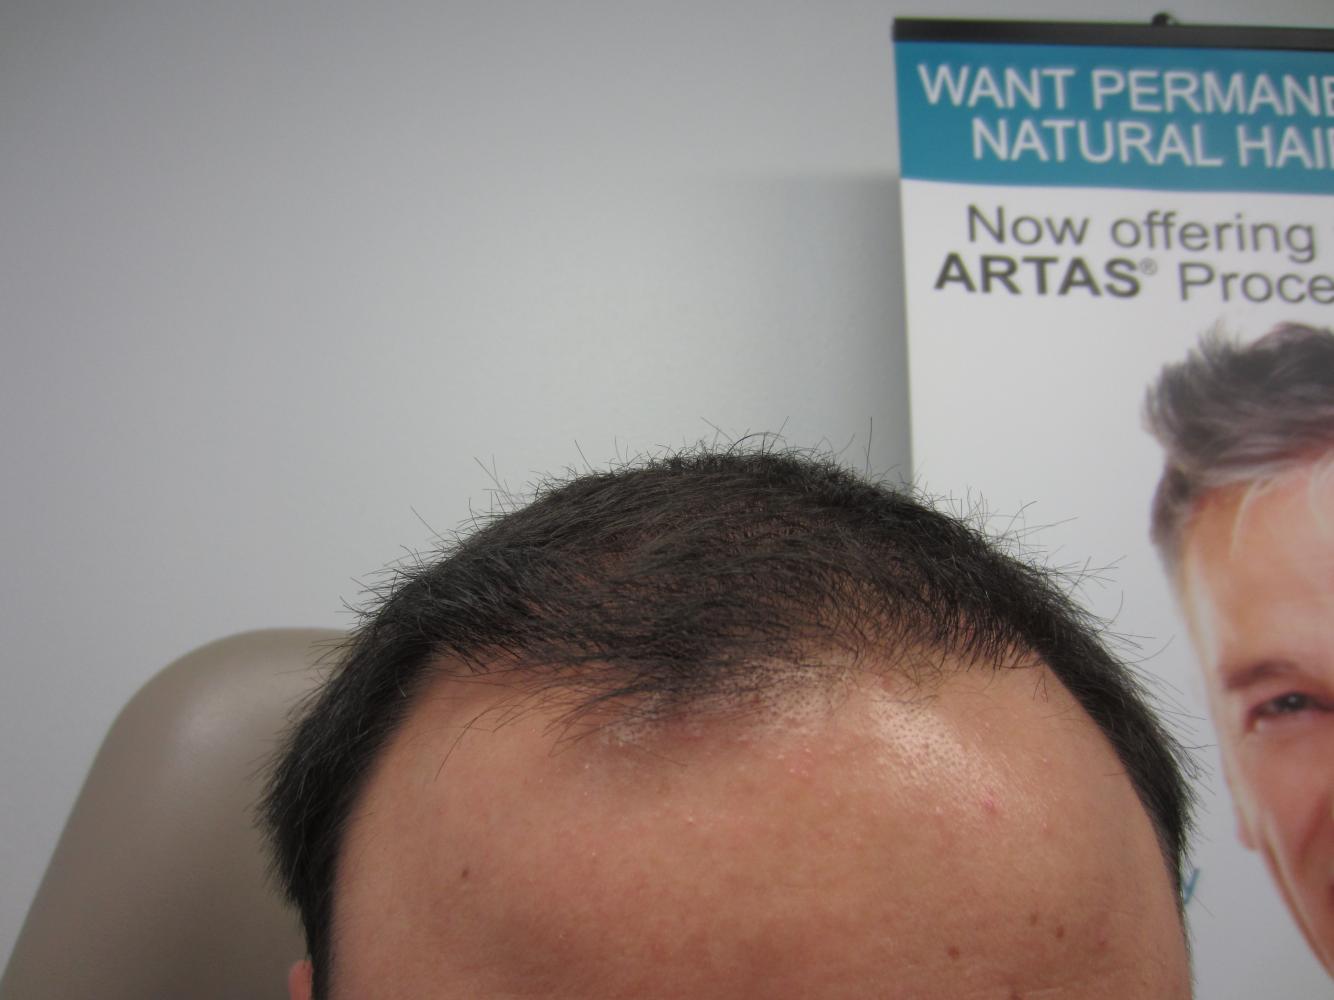 1 Year after hair restoration by FUE grafts